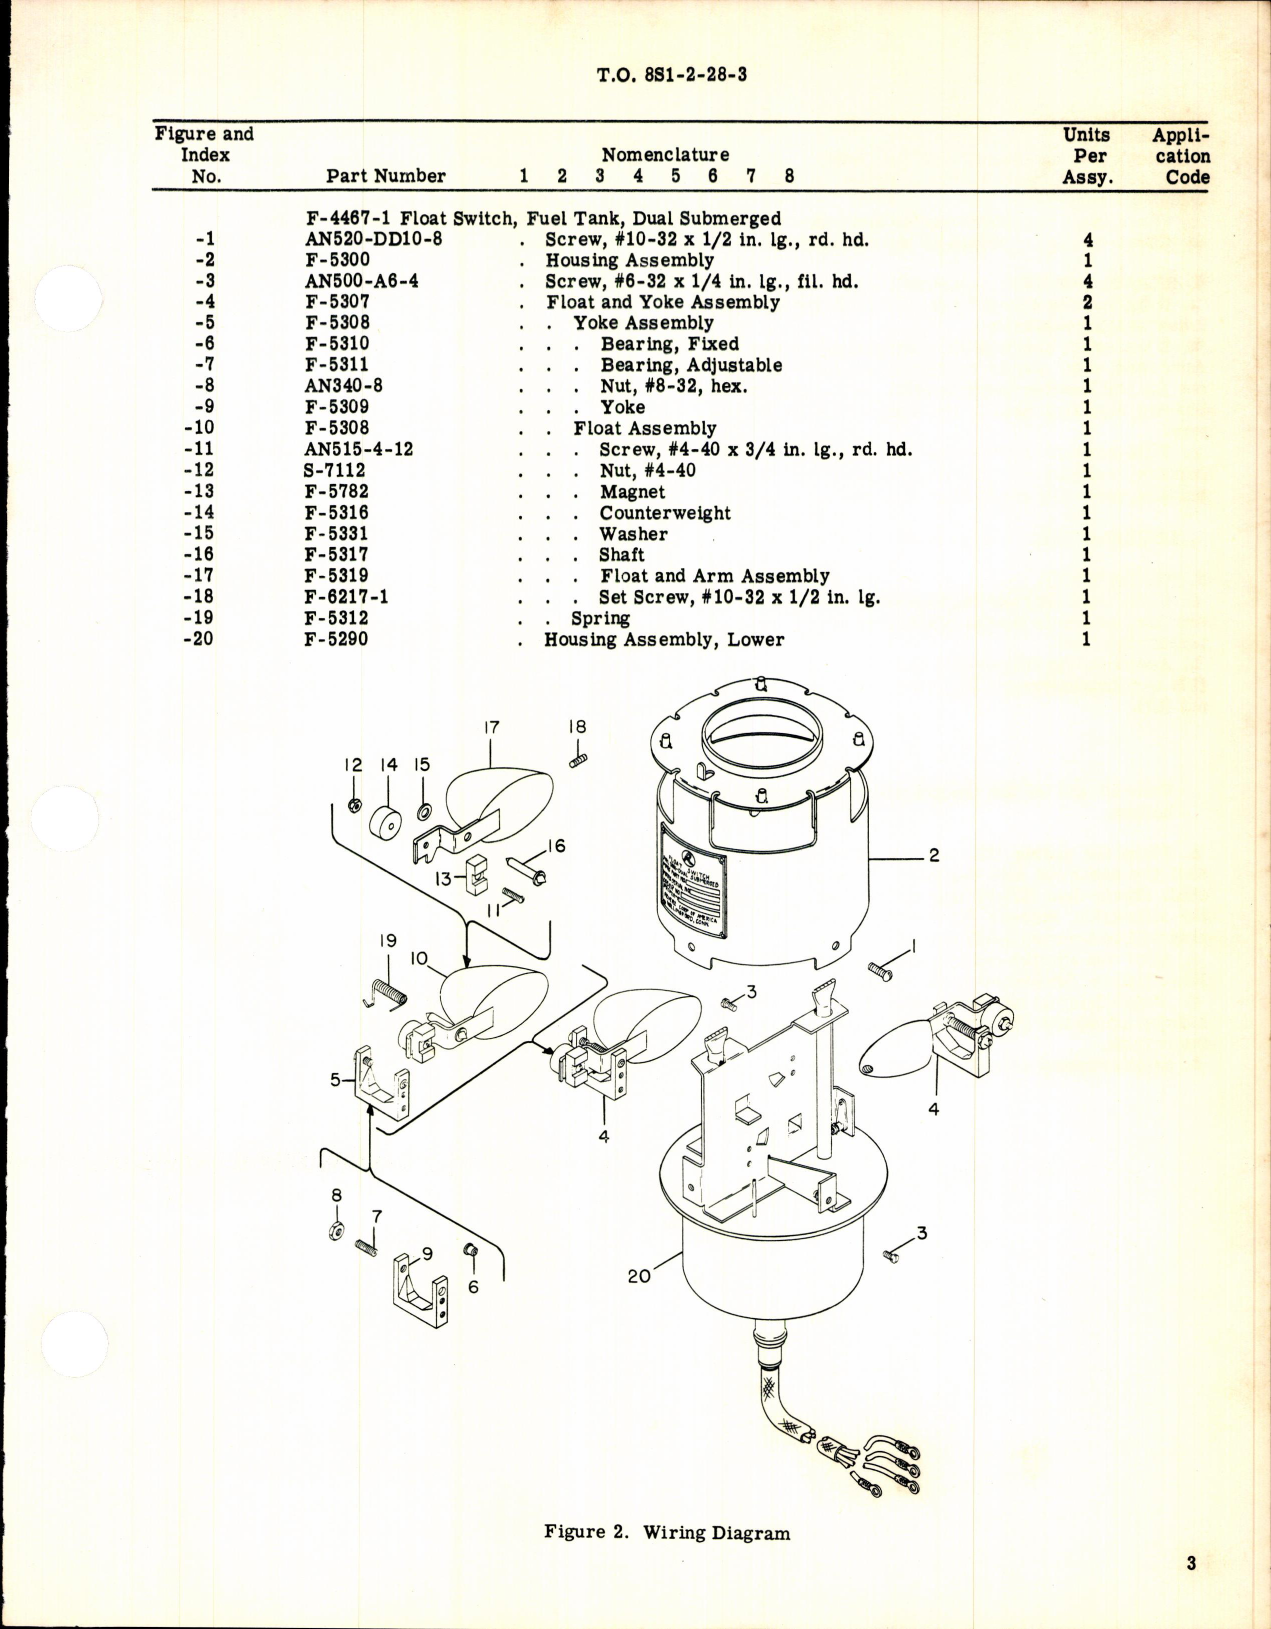 Sample page 3 from AirCorps Library document: Switch Assembly, Fuel Tank, Dual Submerged 